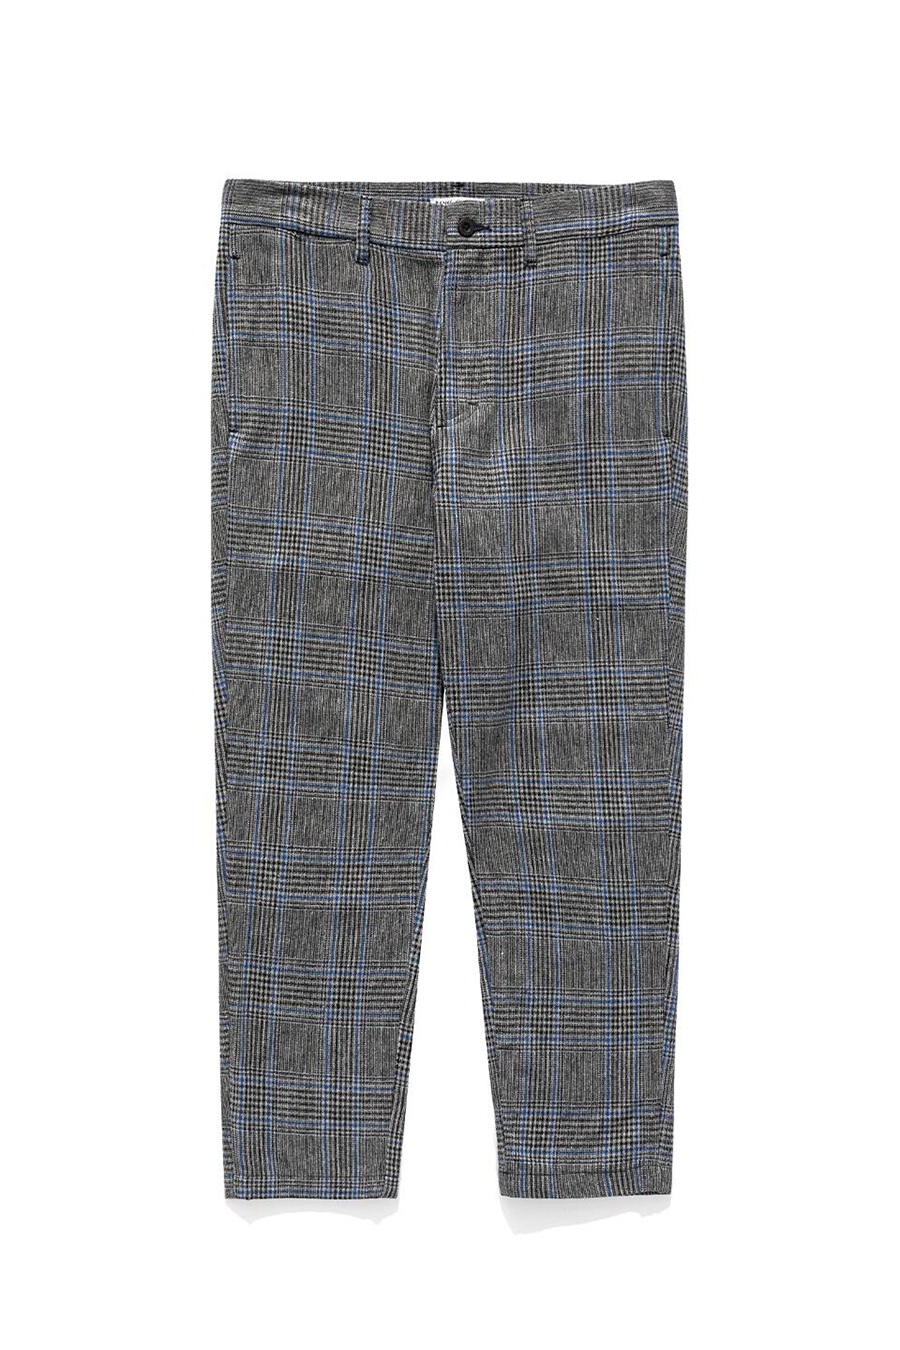 Downtown Check Pant | Grey - Main Image Number 1 of 1